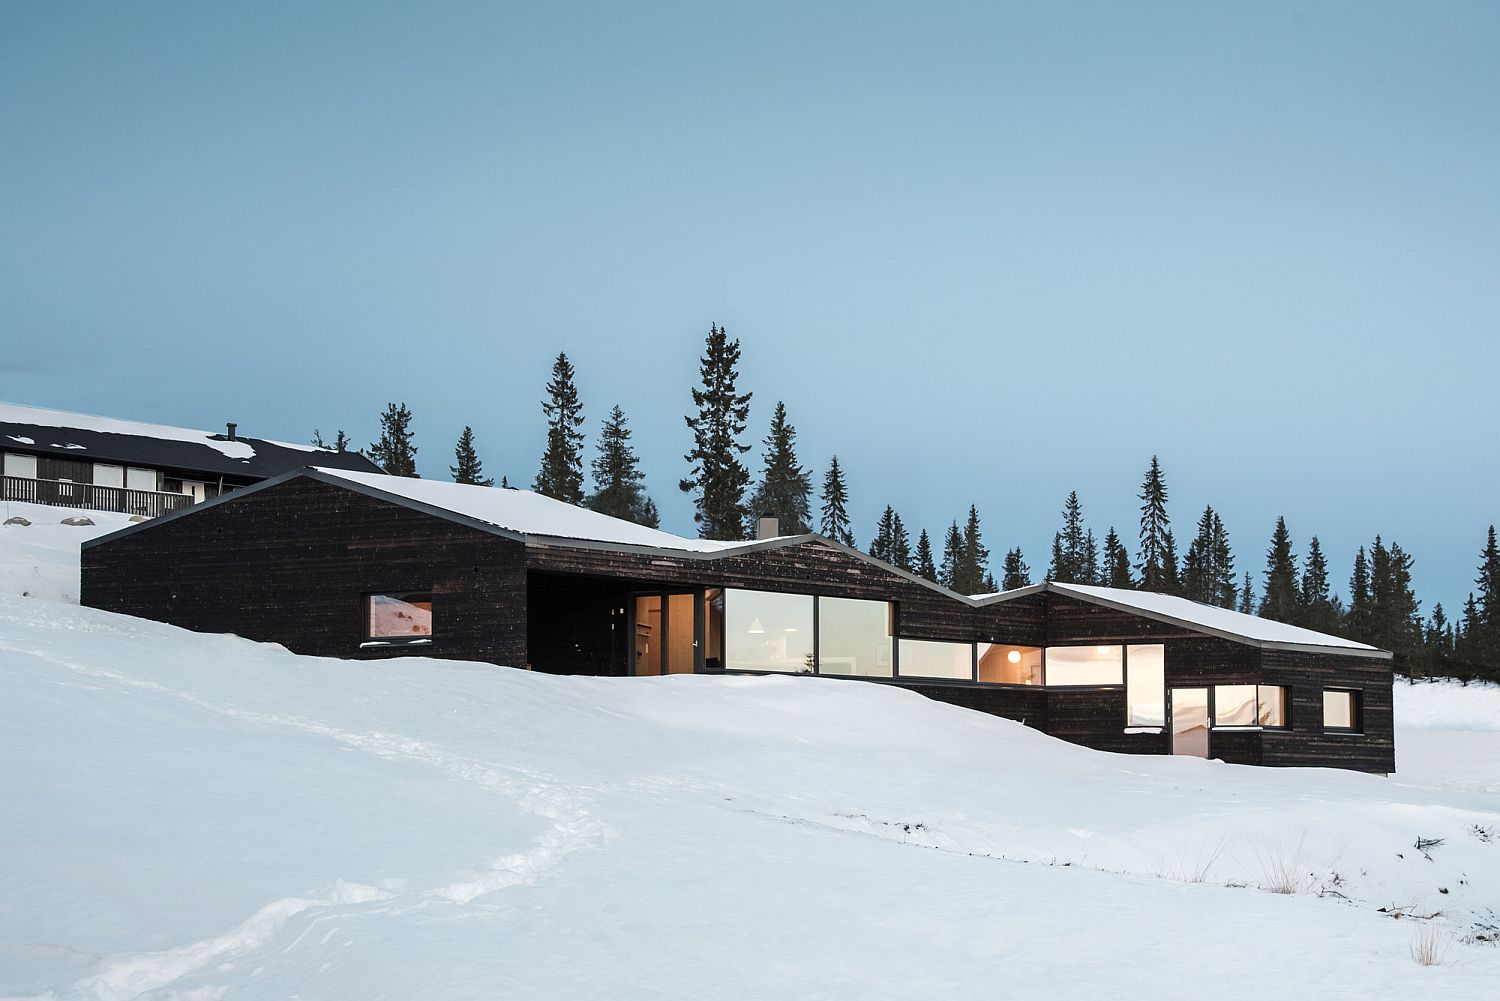 Smart-placement-of-windows-gives-the-cabin-a-modern-vibe